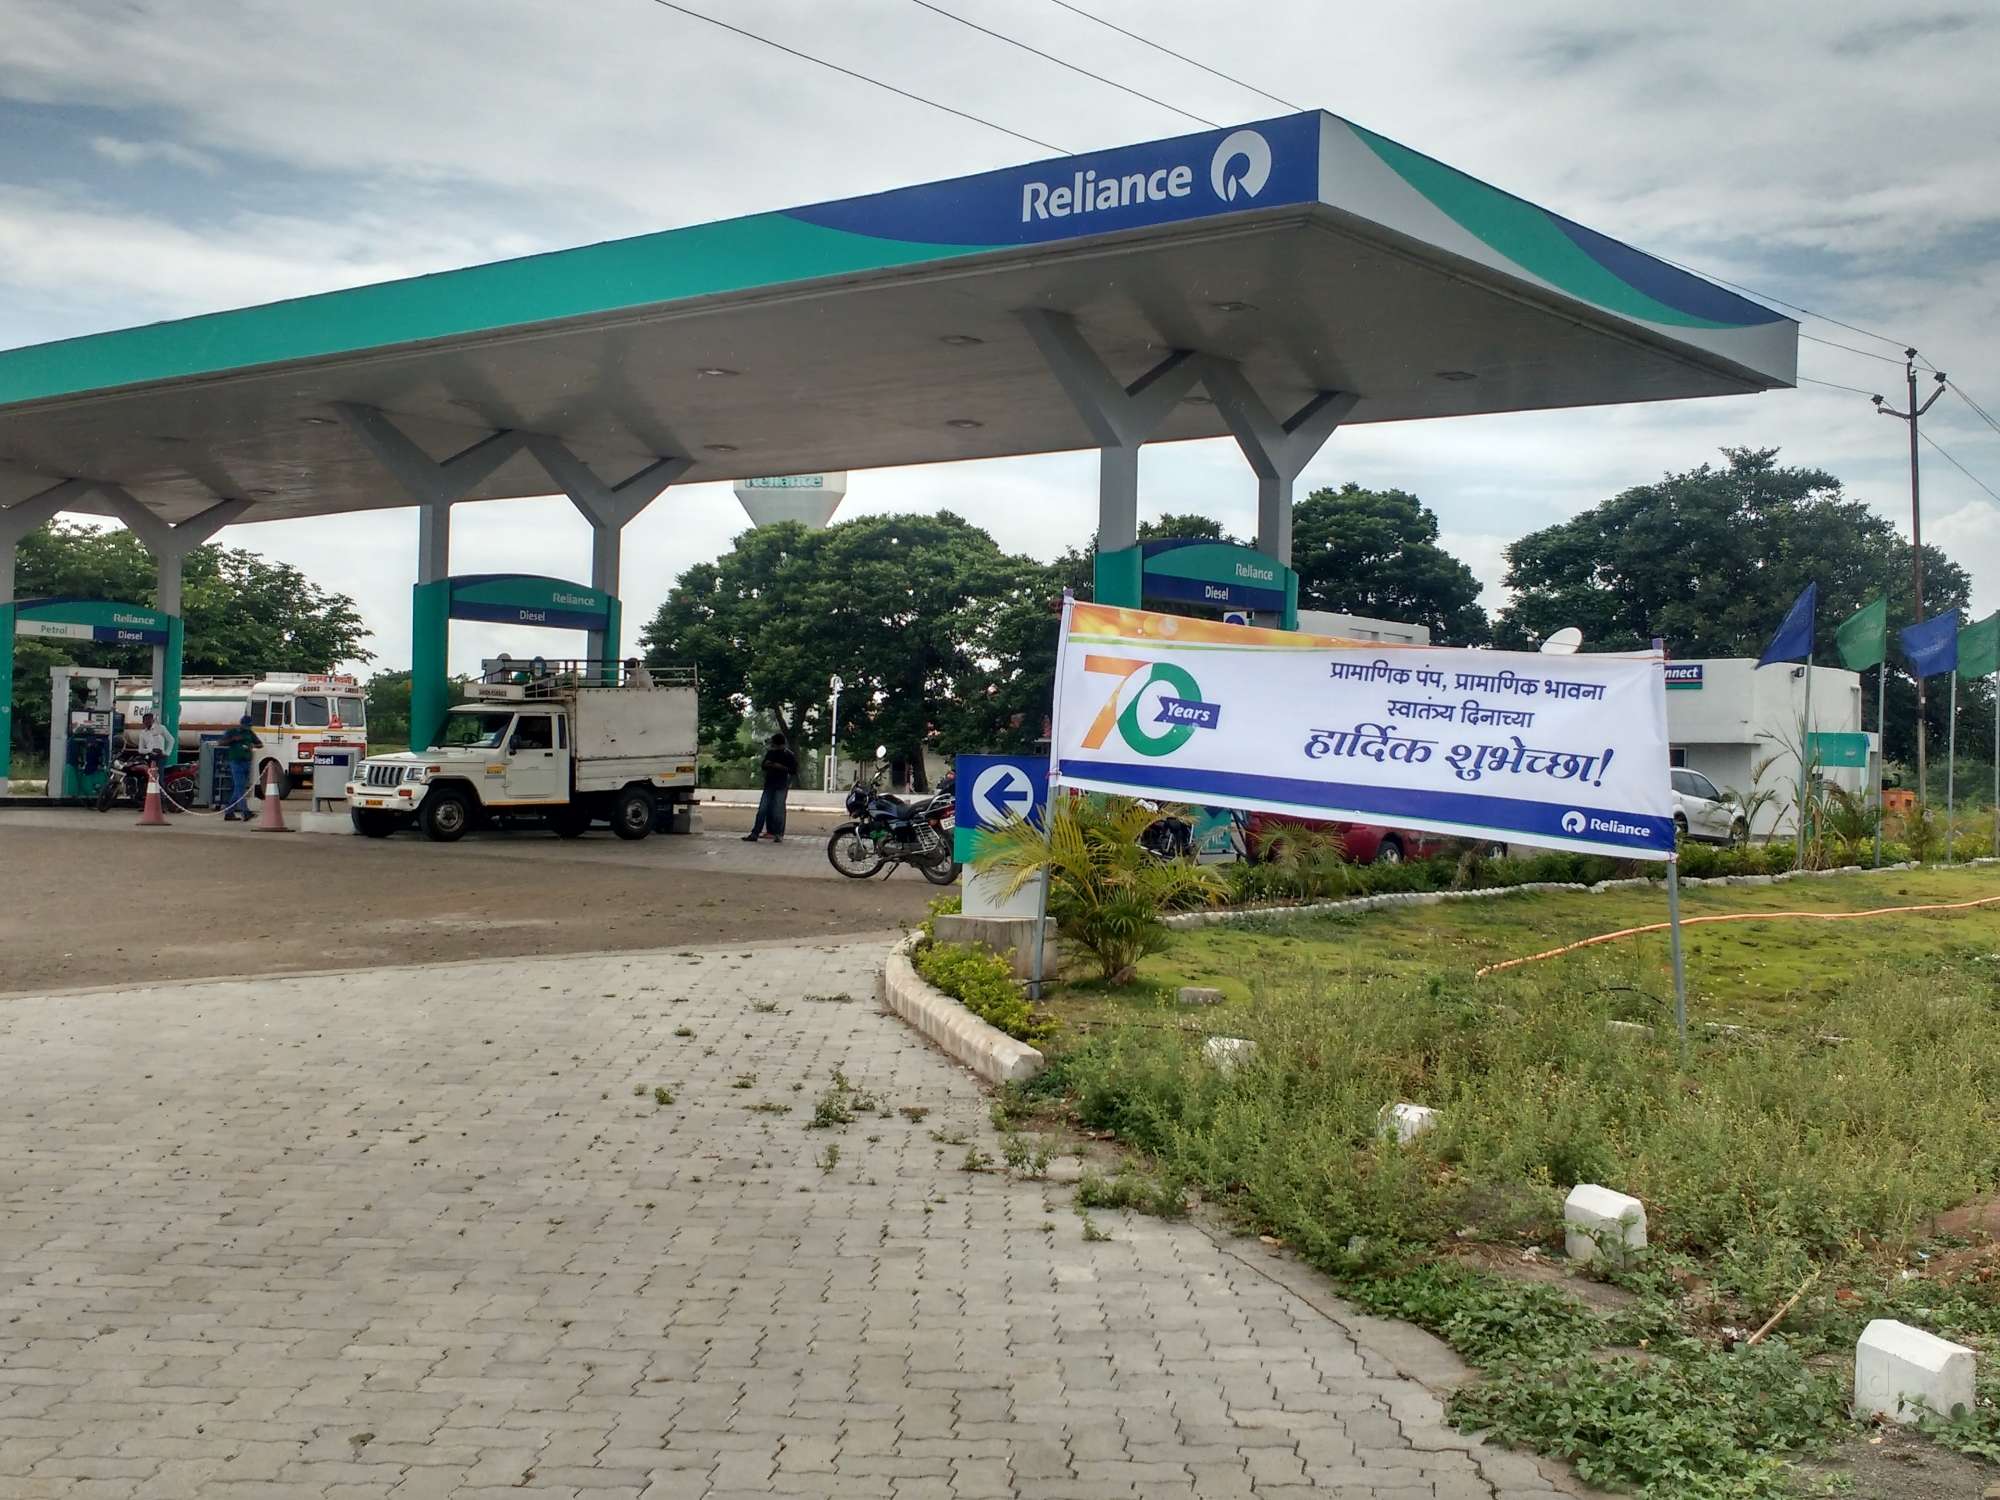 Reliance Petrol Pump in Mohol, Solapur - Justdial